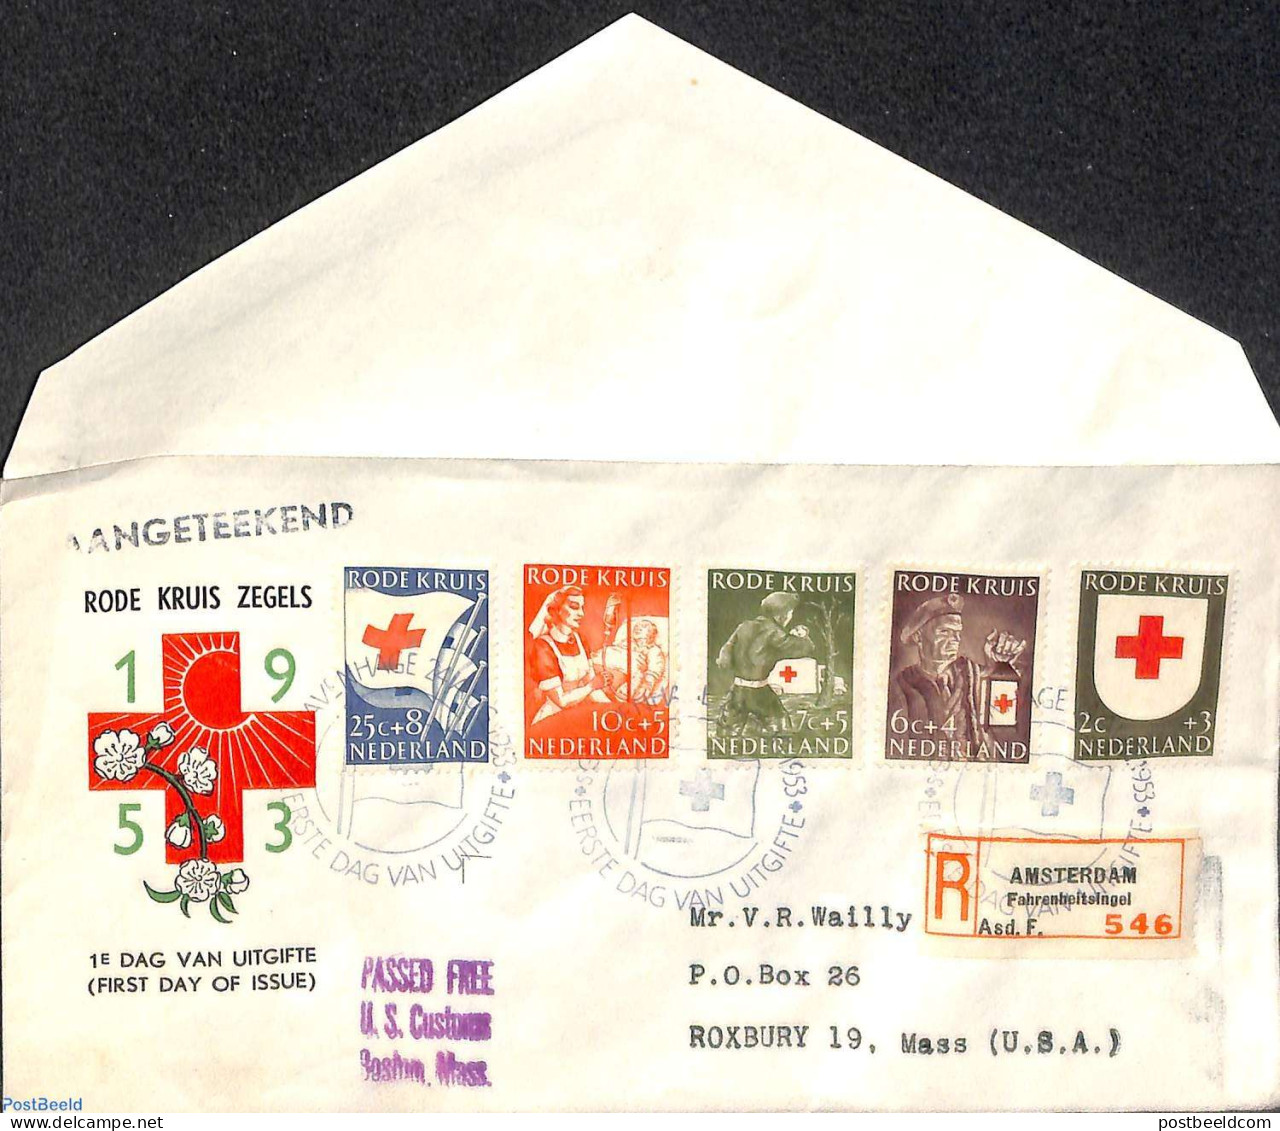 Netherlands 1953 Red Cross FDC, Open Flap, Typed Address, First Day Cover, Health - Red Cross - Lettres & Documents